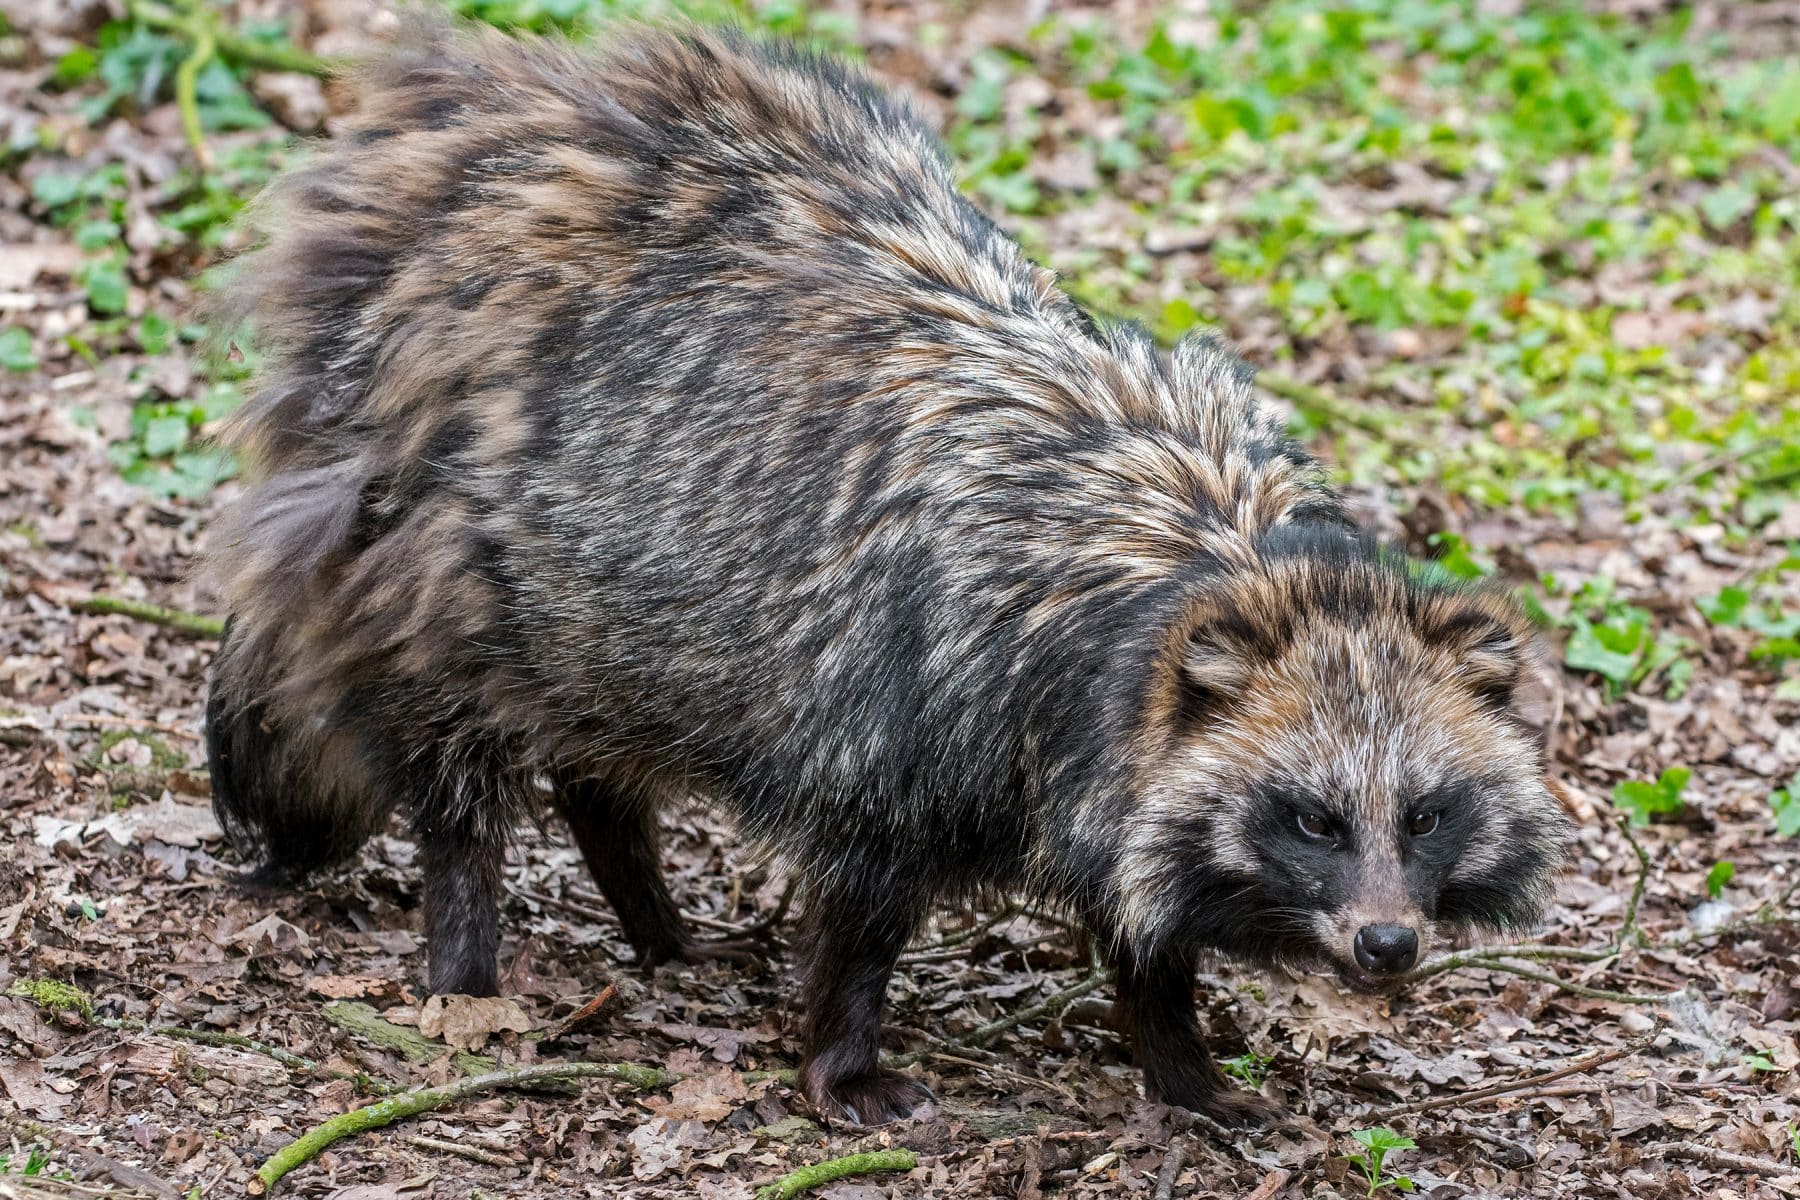 Raccoon Dogs: What Are They, Anyway? | The Dog People by Rover.com